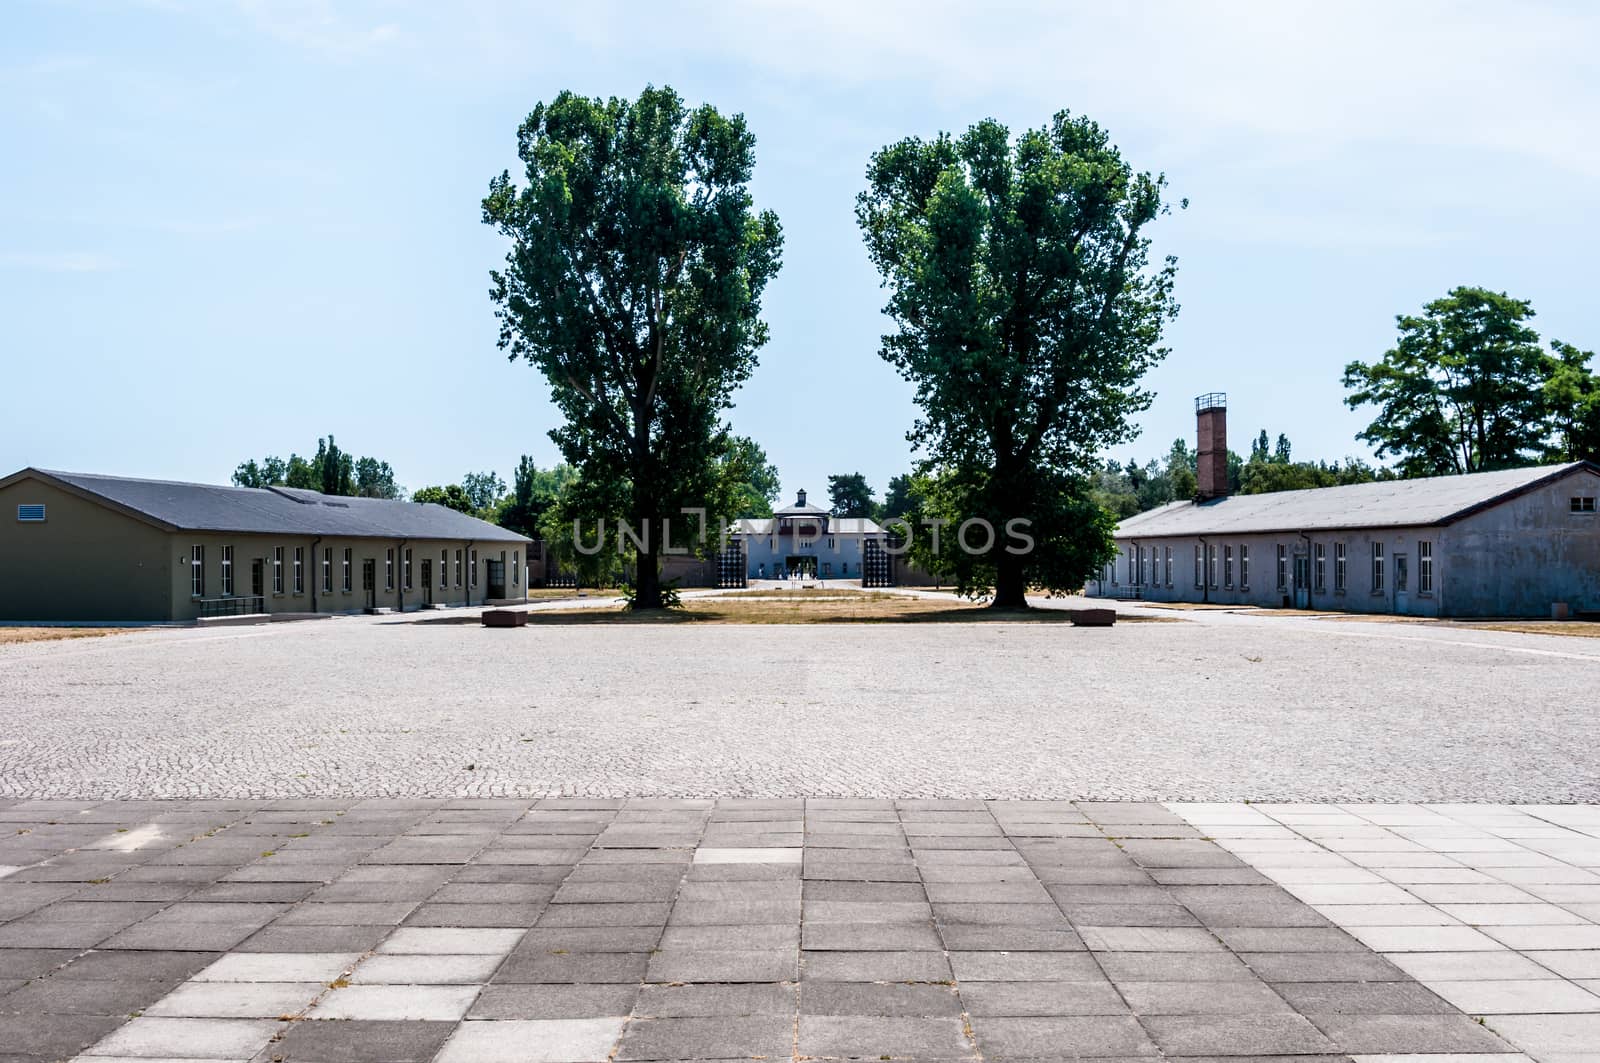 part of the former concentration camp Sachsenhausen near Berlin